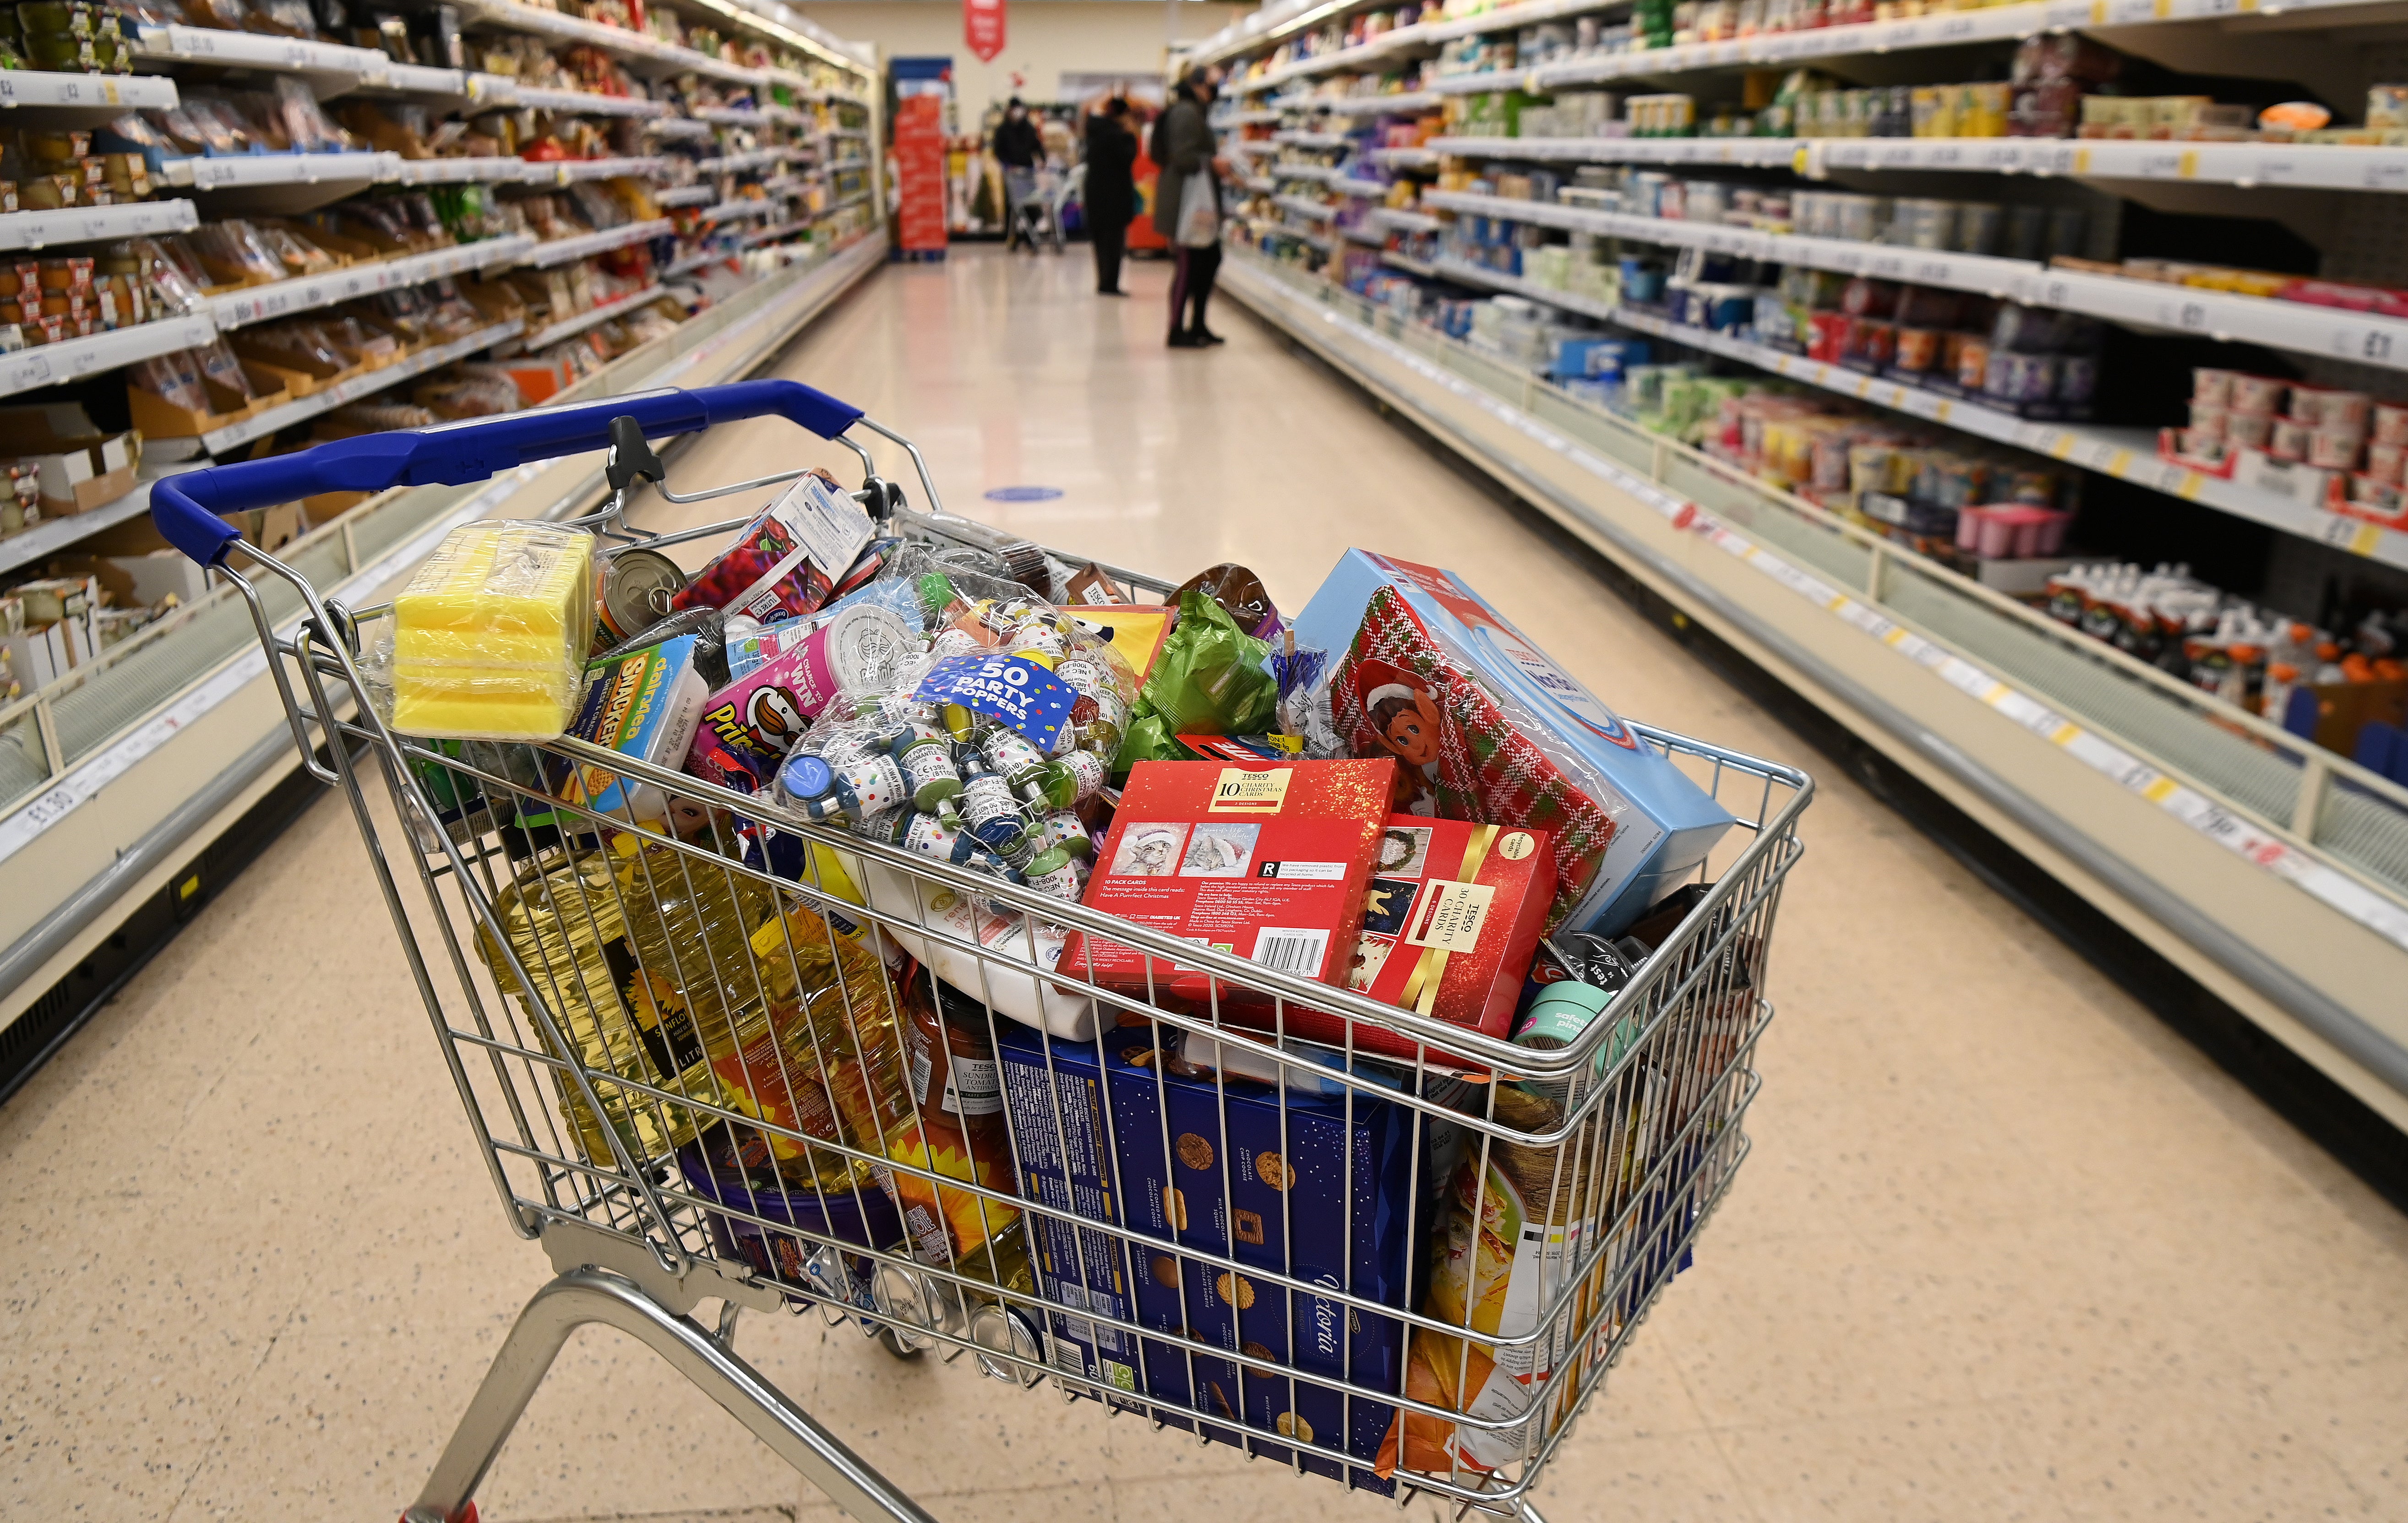 Supermarkets began stockpiling food and other goods this weekend in preparation